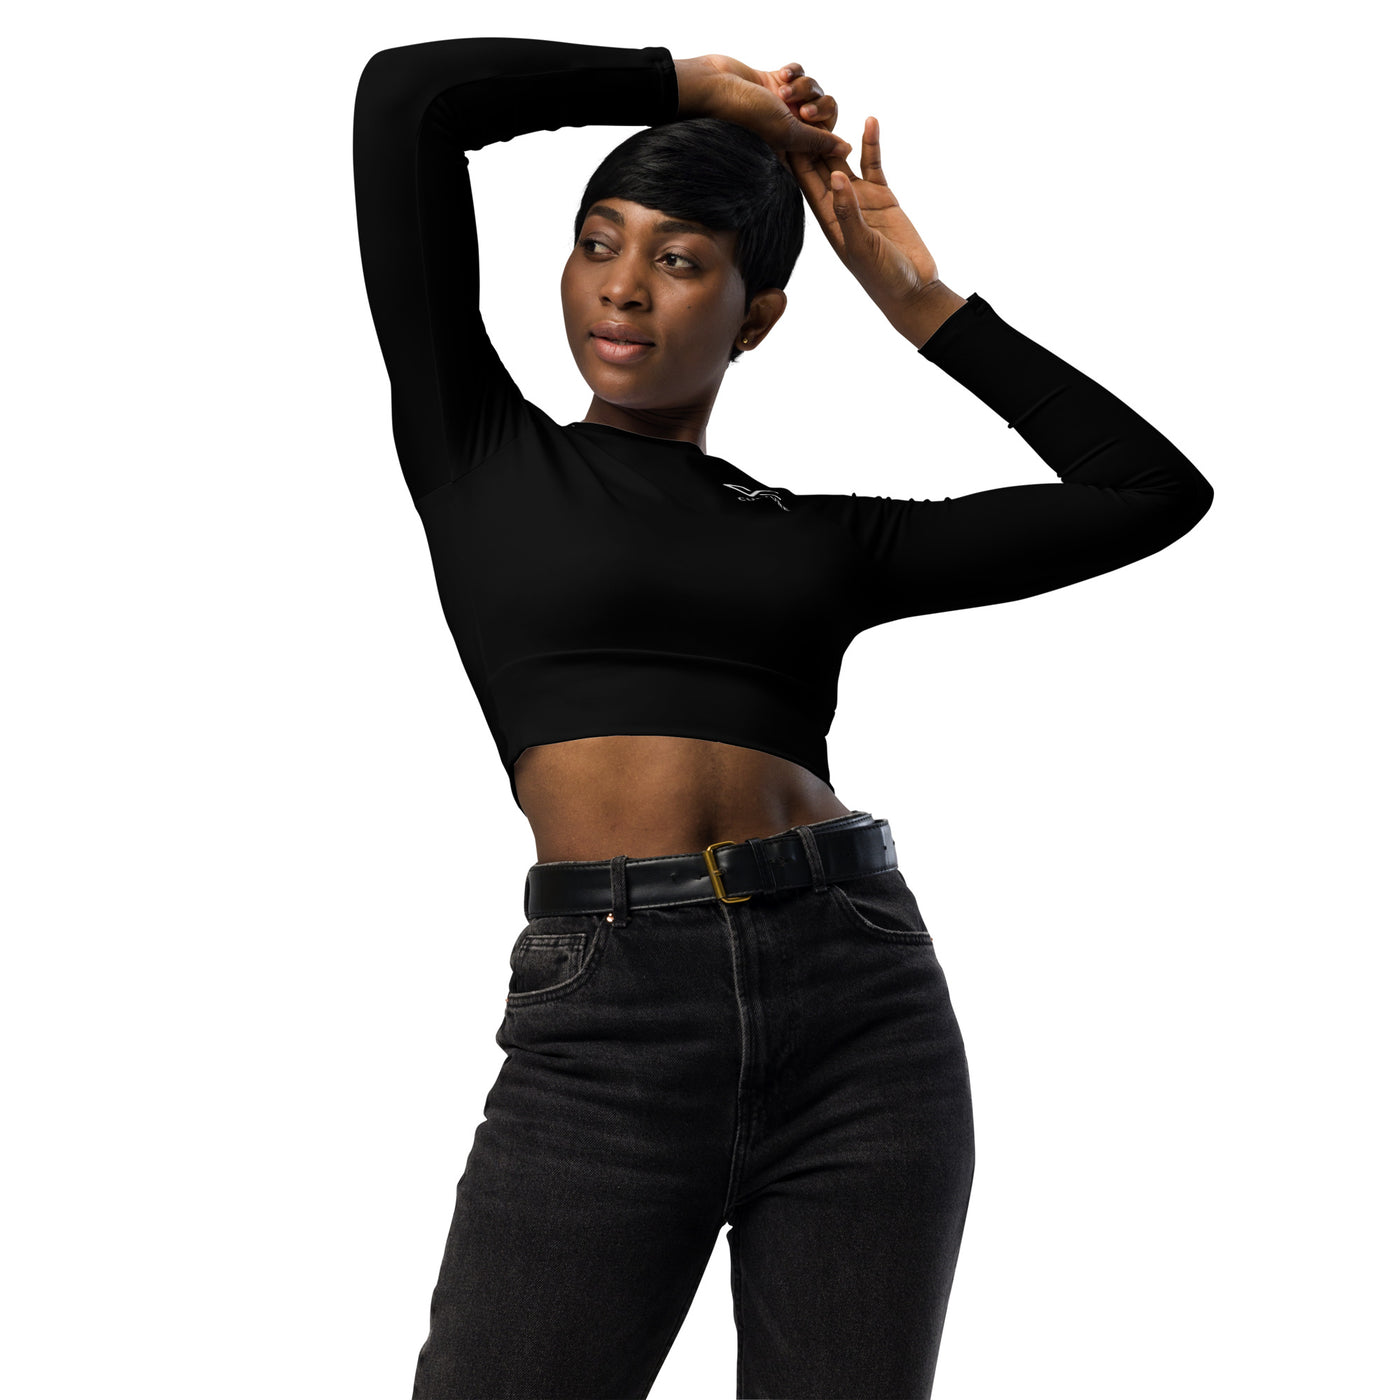 UNSTOPPABLE Women's long-sleeve crop top